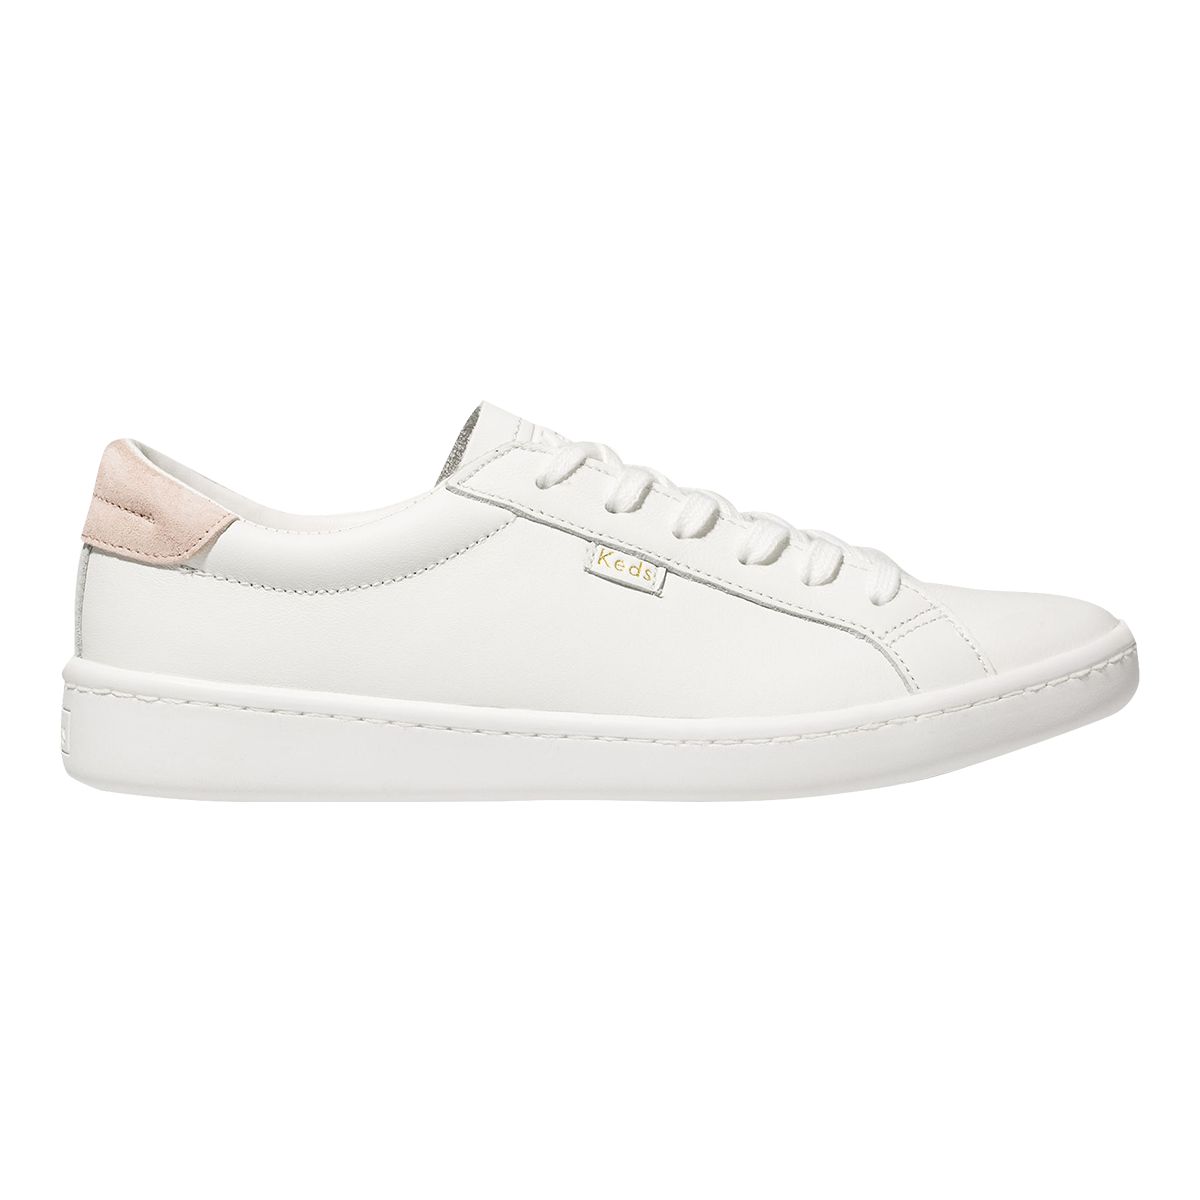 Image of Keds Women's Ace Seas Leather Sneakers White